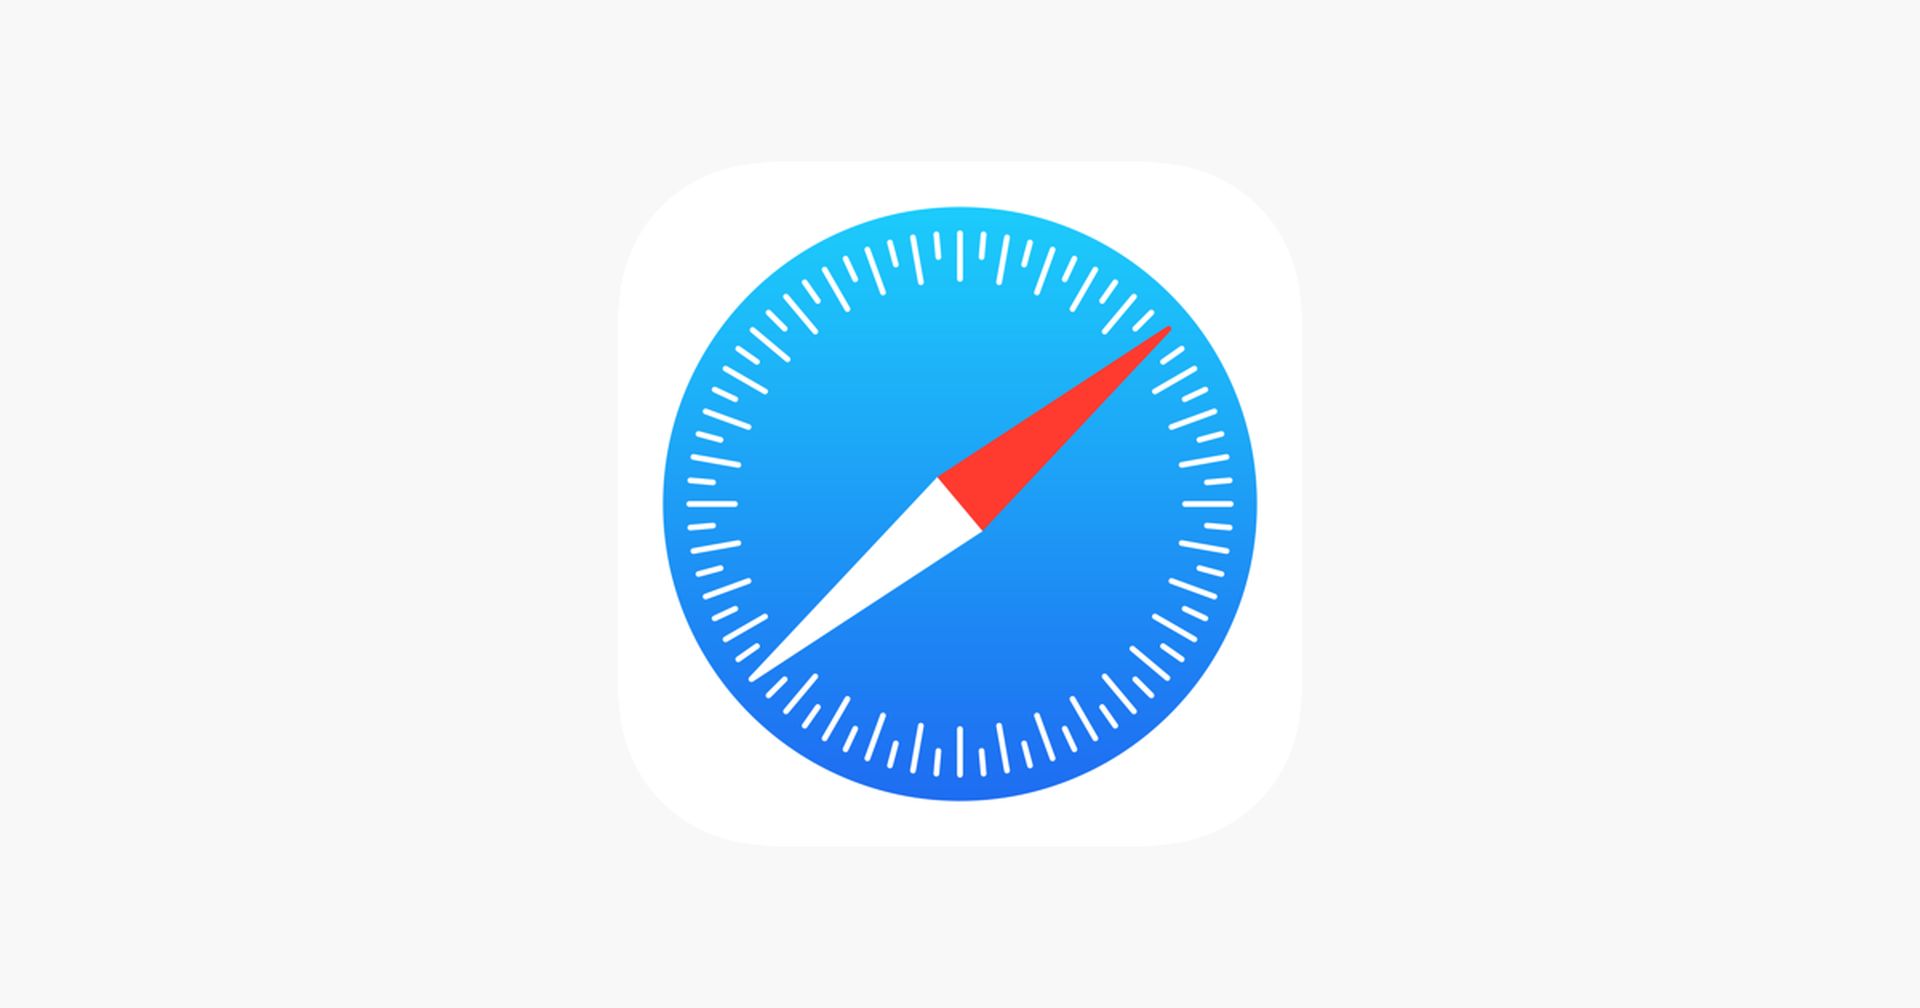 In this article, we are going to be covering how to get rid of frequently visited on Safari, so you can enjoy a more minimalist start page while using the browser.